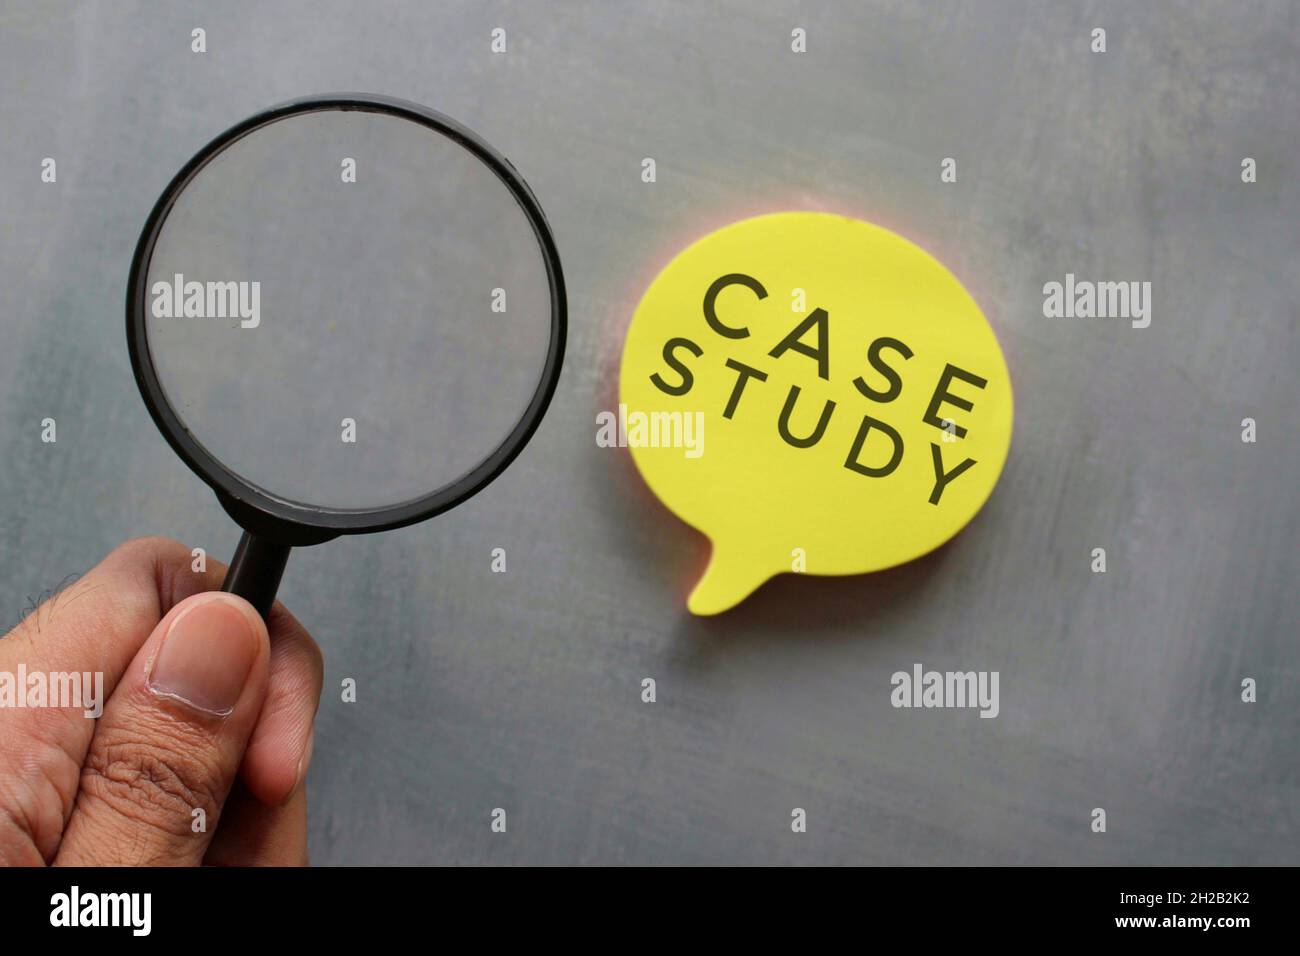 Case study concept. Hand holding magnifying glass and bubble speech with text CASE STUDY. Stock Photo